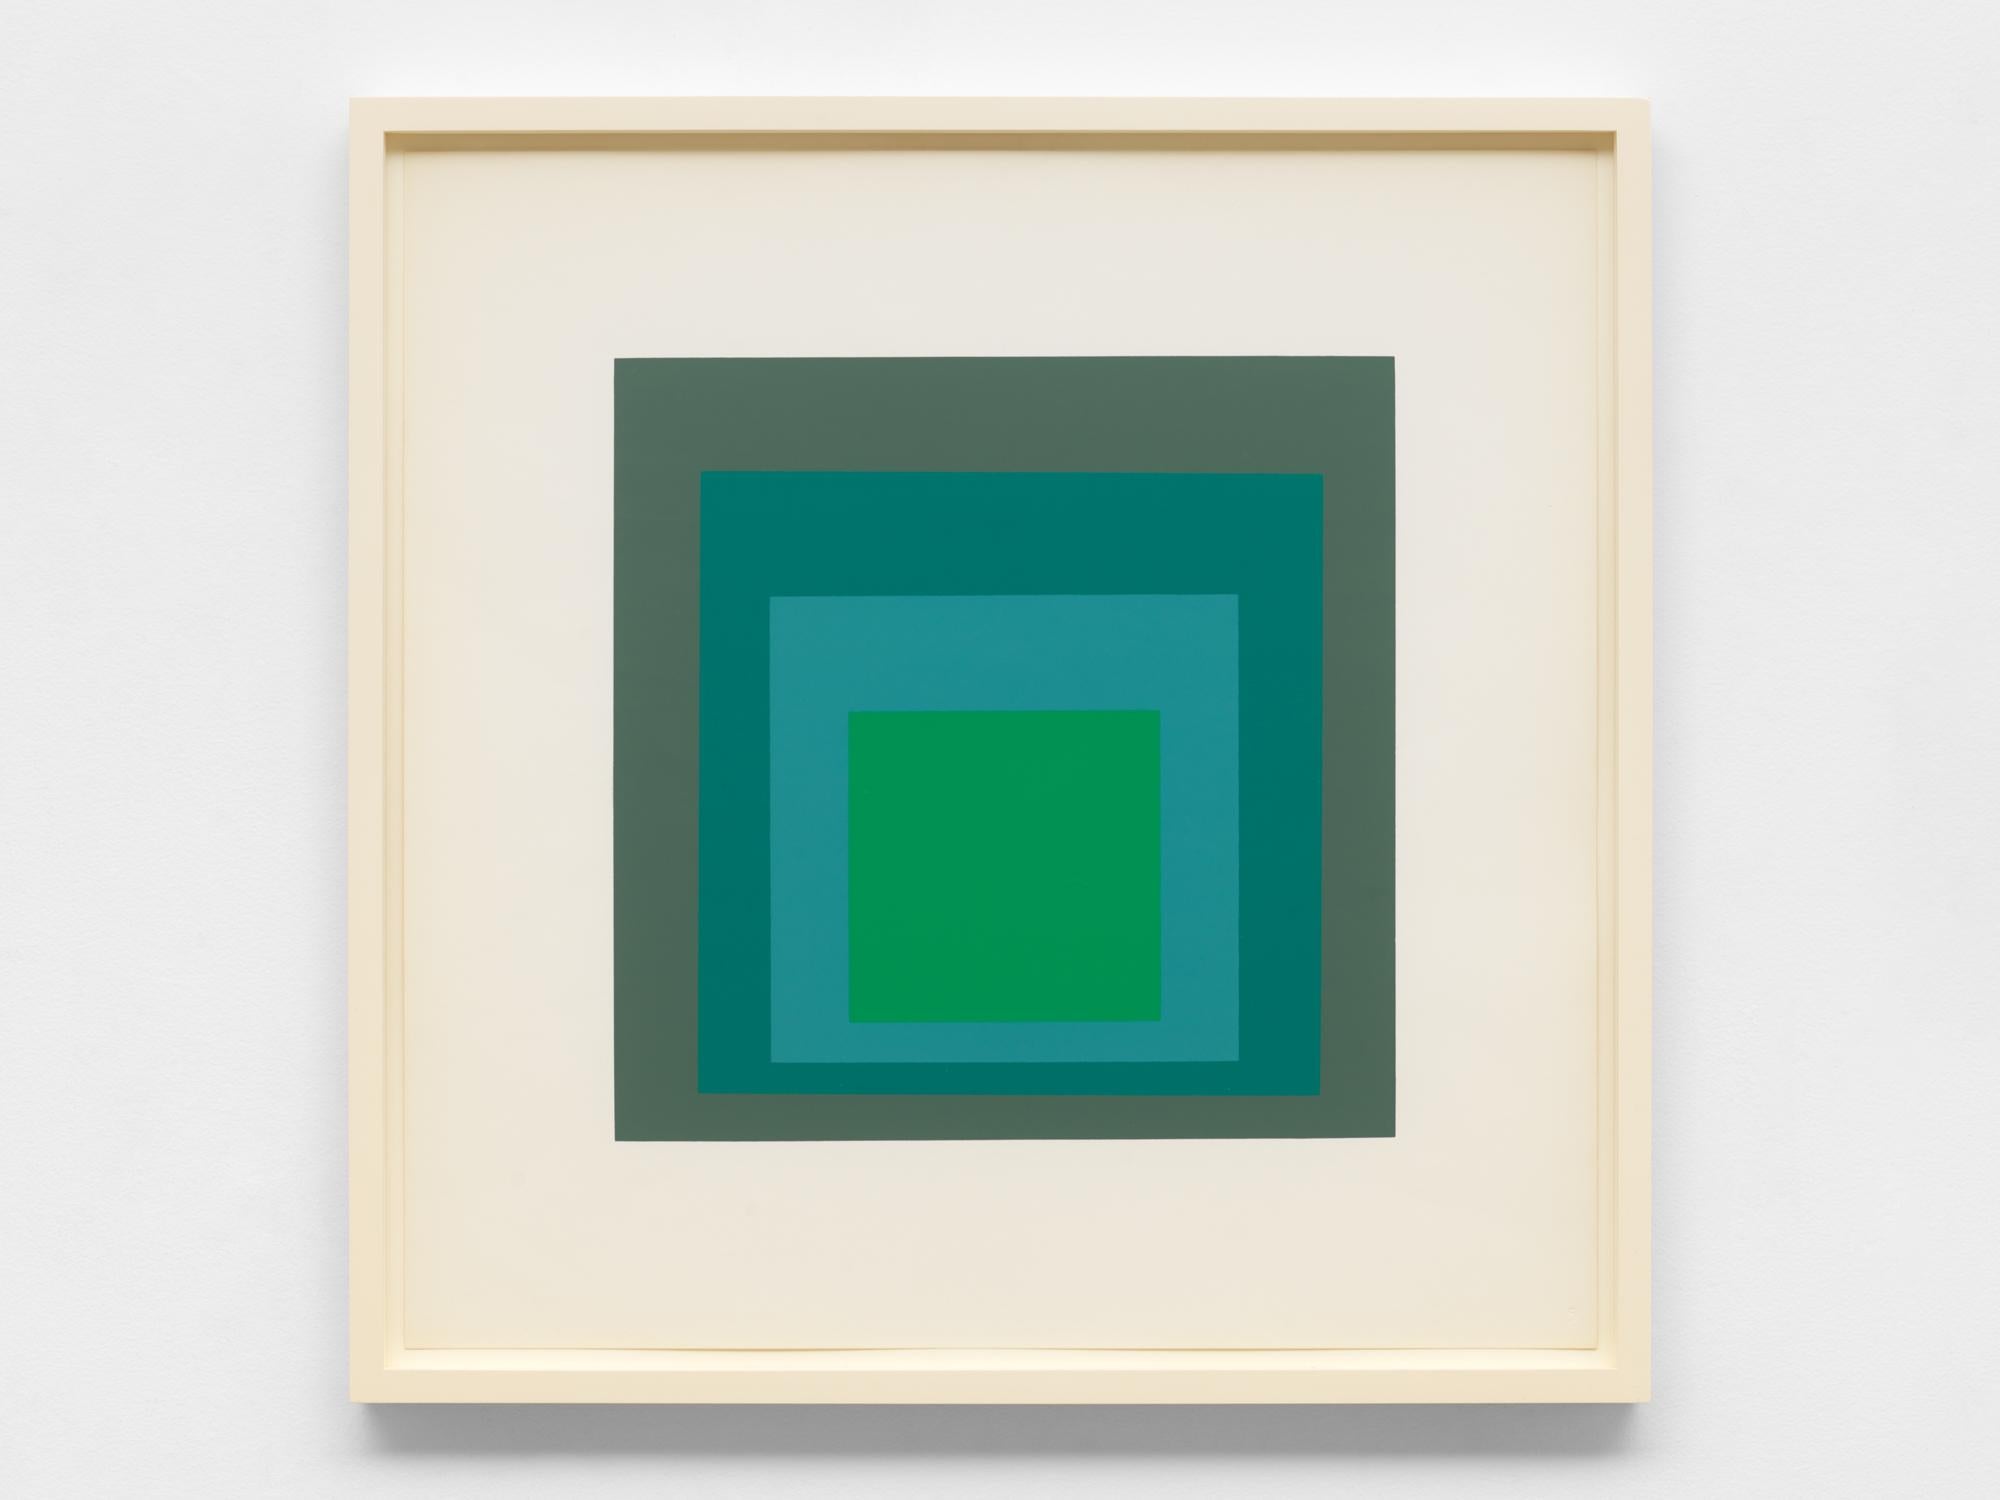 Homage to the Square - Abstract Geometric Print by Josef Albers